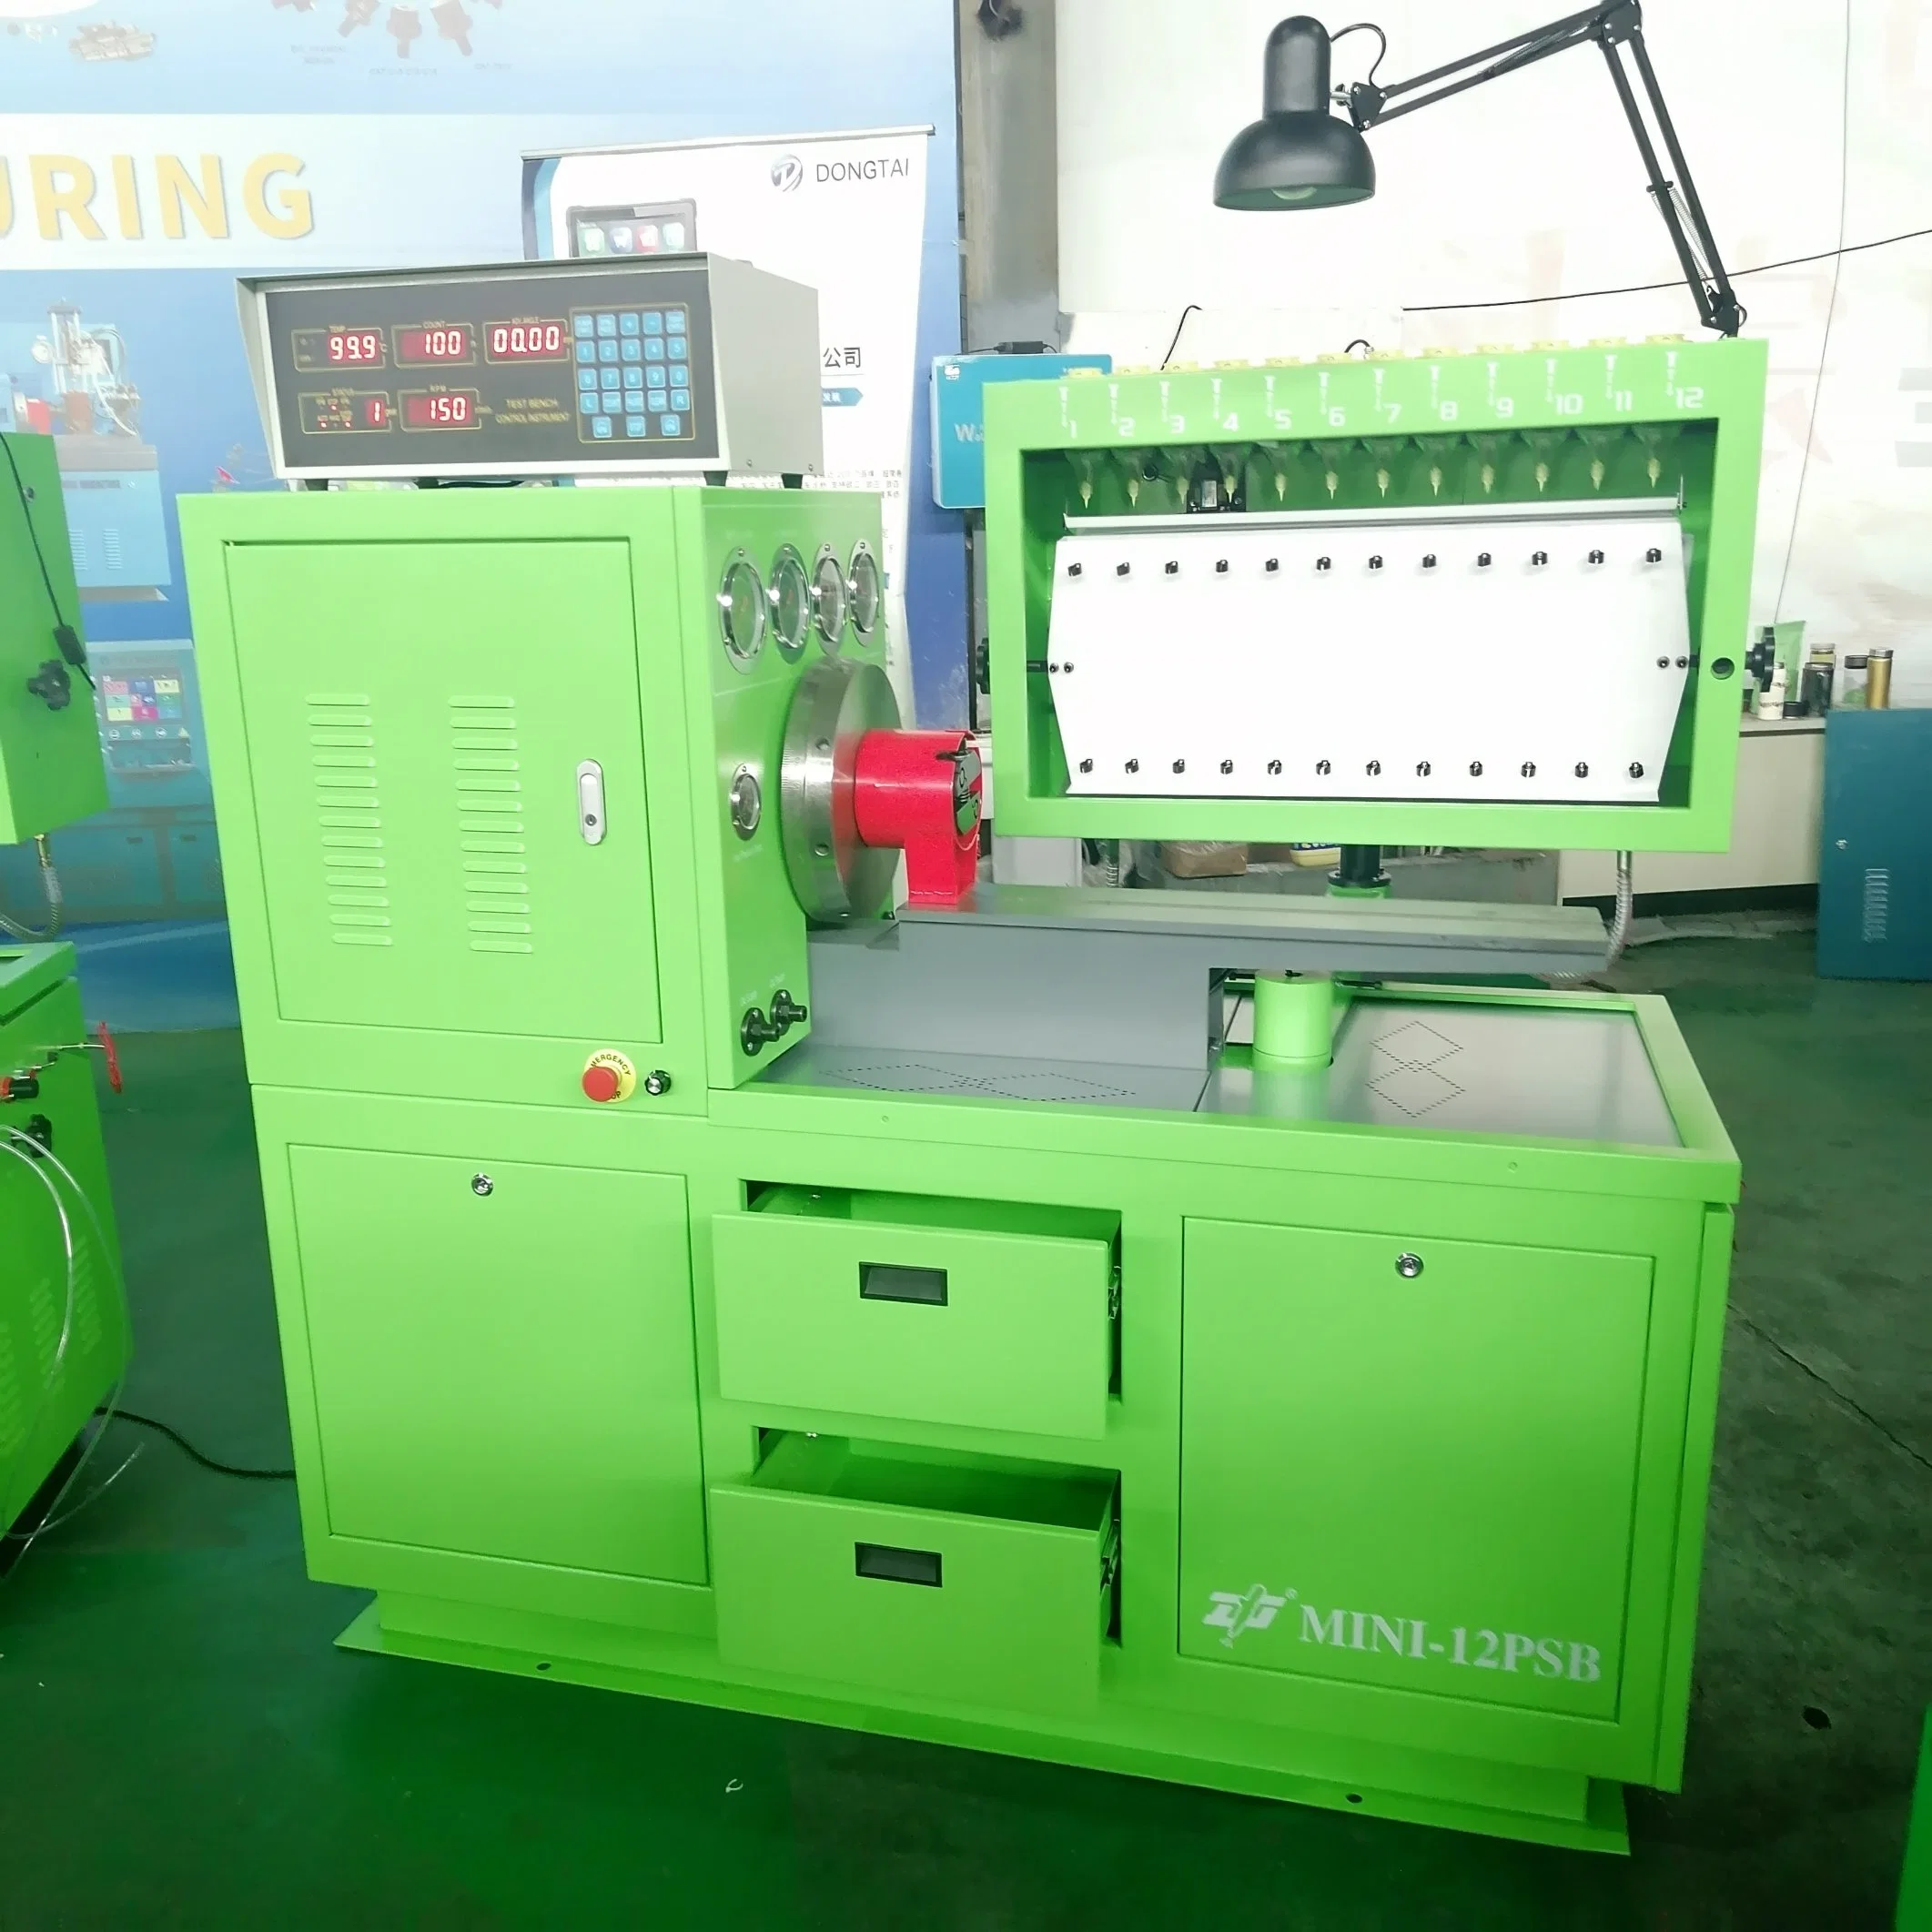 Dongtai -12psb Diesel Injection Pump Test Bench Accessories (With BOSCCH FIXING STANDS)